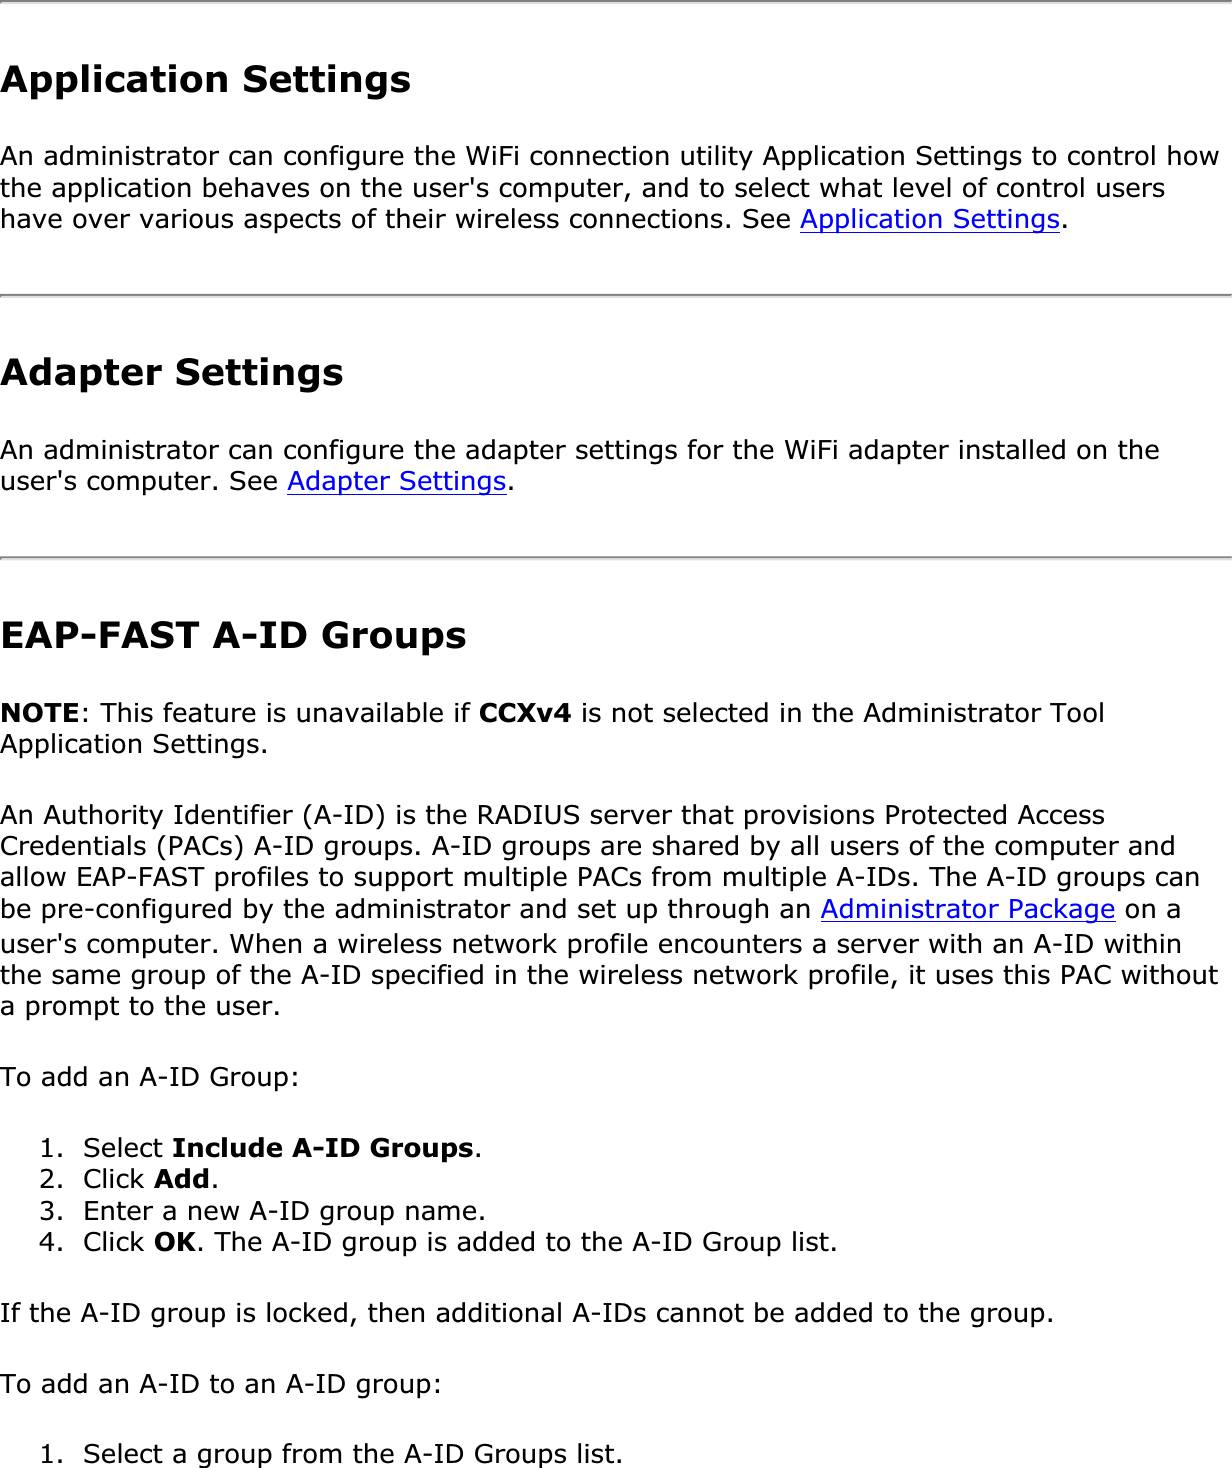 Application SettingsAn administrator can configure the WiFi connection utility Application Settings to control how the application behaves on the user&apos;s computer, and to select what level of control users have over various aspects of their wireless connections. See Application Settings.Adapter Settings An administrator can configure the adapter settings for the WiFi adapter installed on the user&apos;s computer. See Adapter Settings.EAP-FAST A-ID Groups NOTE: This feature is unavailable if CCXv4 is not selected in the Administrator Tool Application Settings.An Authority Identifier (A-ID) is the RADIUS server that provisions Protected Access Credentials (PACs) A-ID groups. A-ID groups are shared by all users of the computer and allow EAP-FAST profiles to support multiple PACs from multiple A-IDs. The A-ID groups can be pre-configured by the administrator and set up through an Administrator Package on a user&apos;s computer. When a wireless network profile encounters a server with an A-ID within the same group of the A-ID specified in the wireless network profile, it uses this PAC without a prompt to the user.To add an A-ID Group: 1. Select Include A-ID Groups.2. Click Add.3. Enter a new A-ID group name.4. Click OK. The A-ID group is added to the A-ID Group list.If the A-ID group is locked, then additional A-IDs cannot be added to the group.To add an A-ID to an A-ID group: 1. Select a group from the A-ID Groups list.